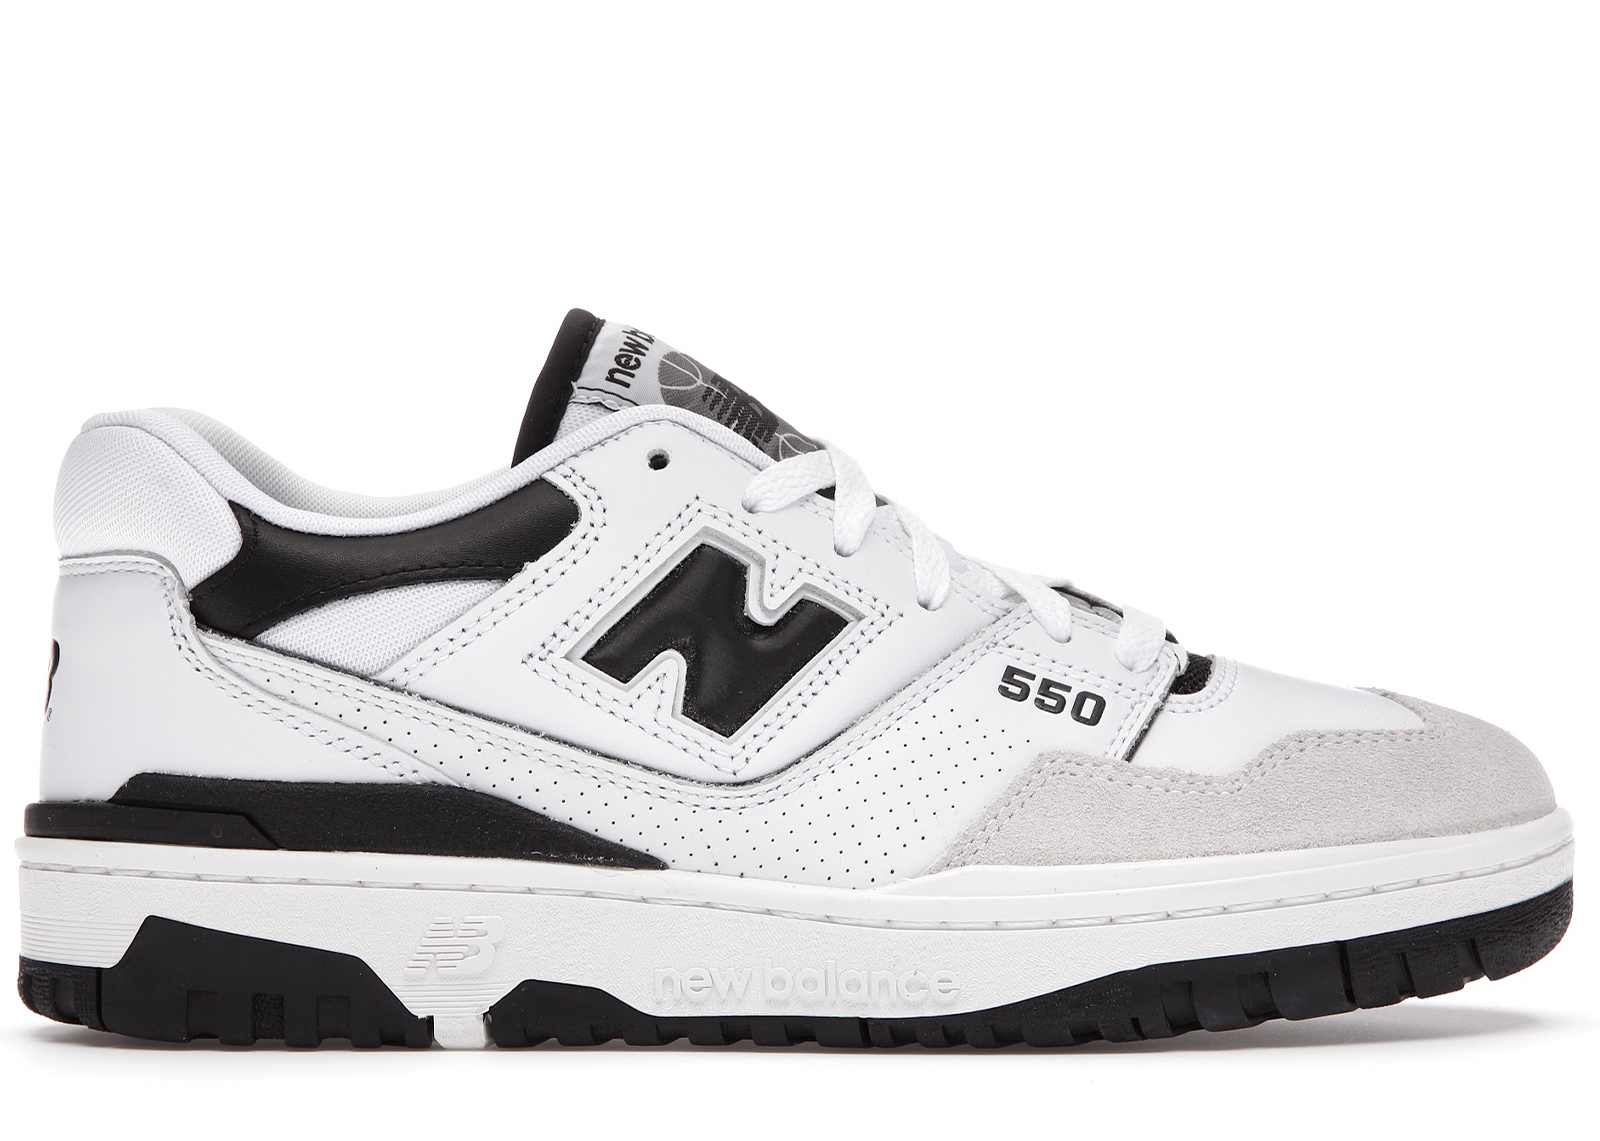 New Balance Shoes - Release Date